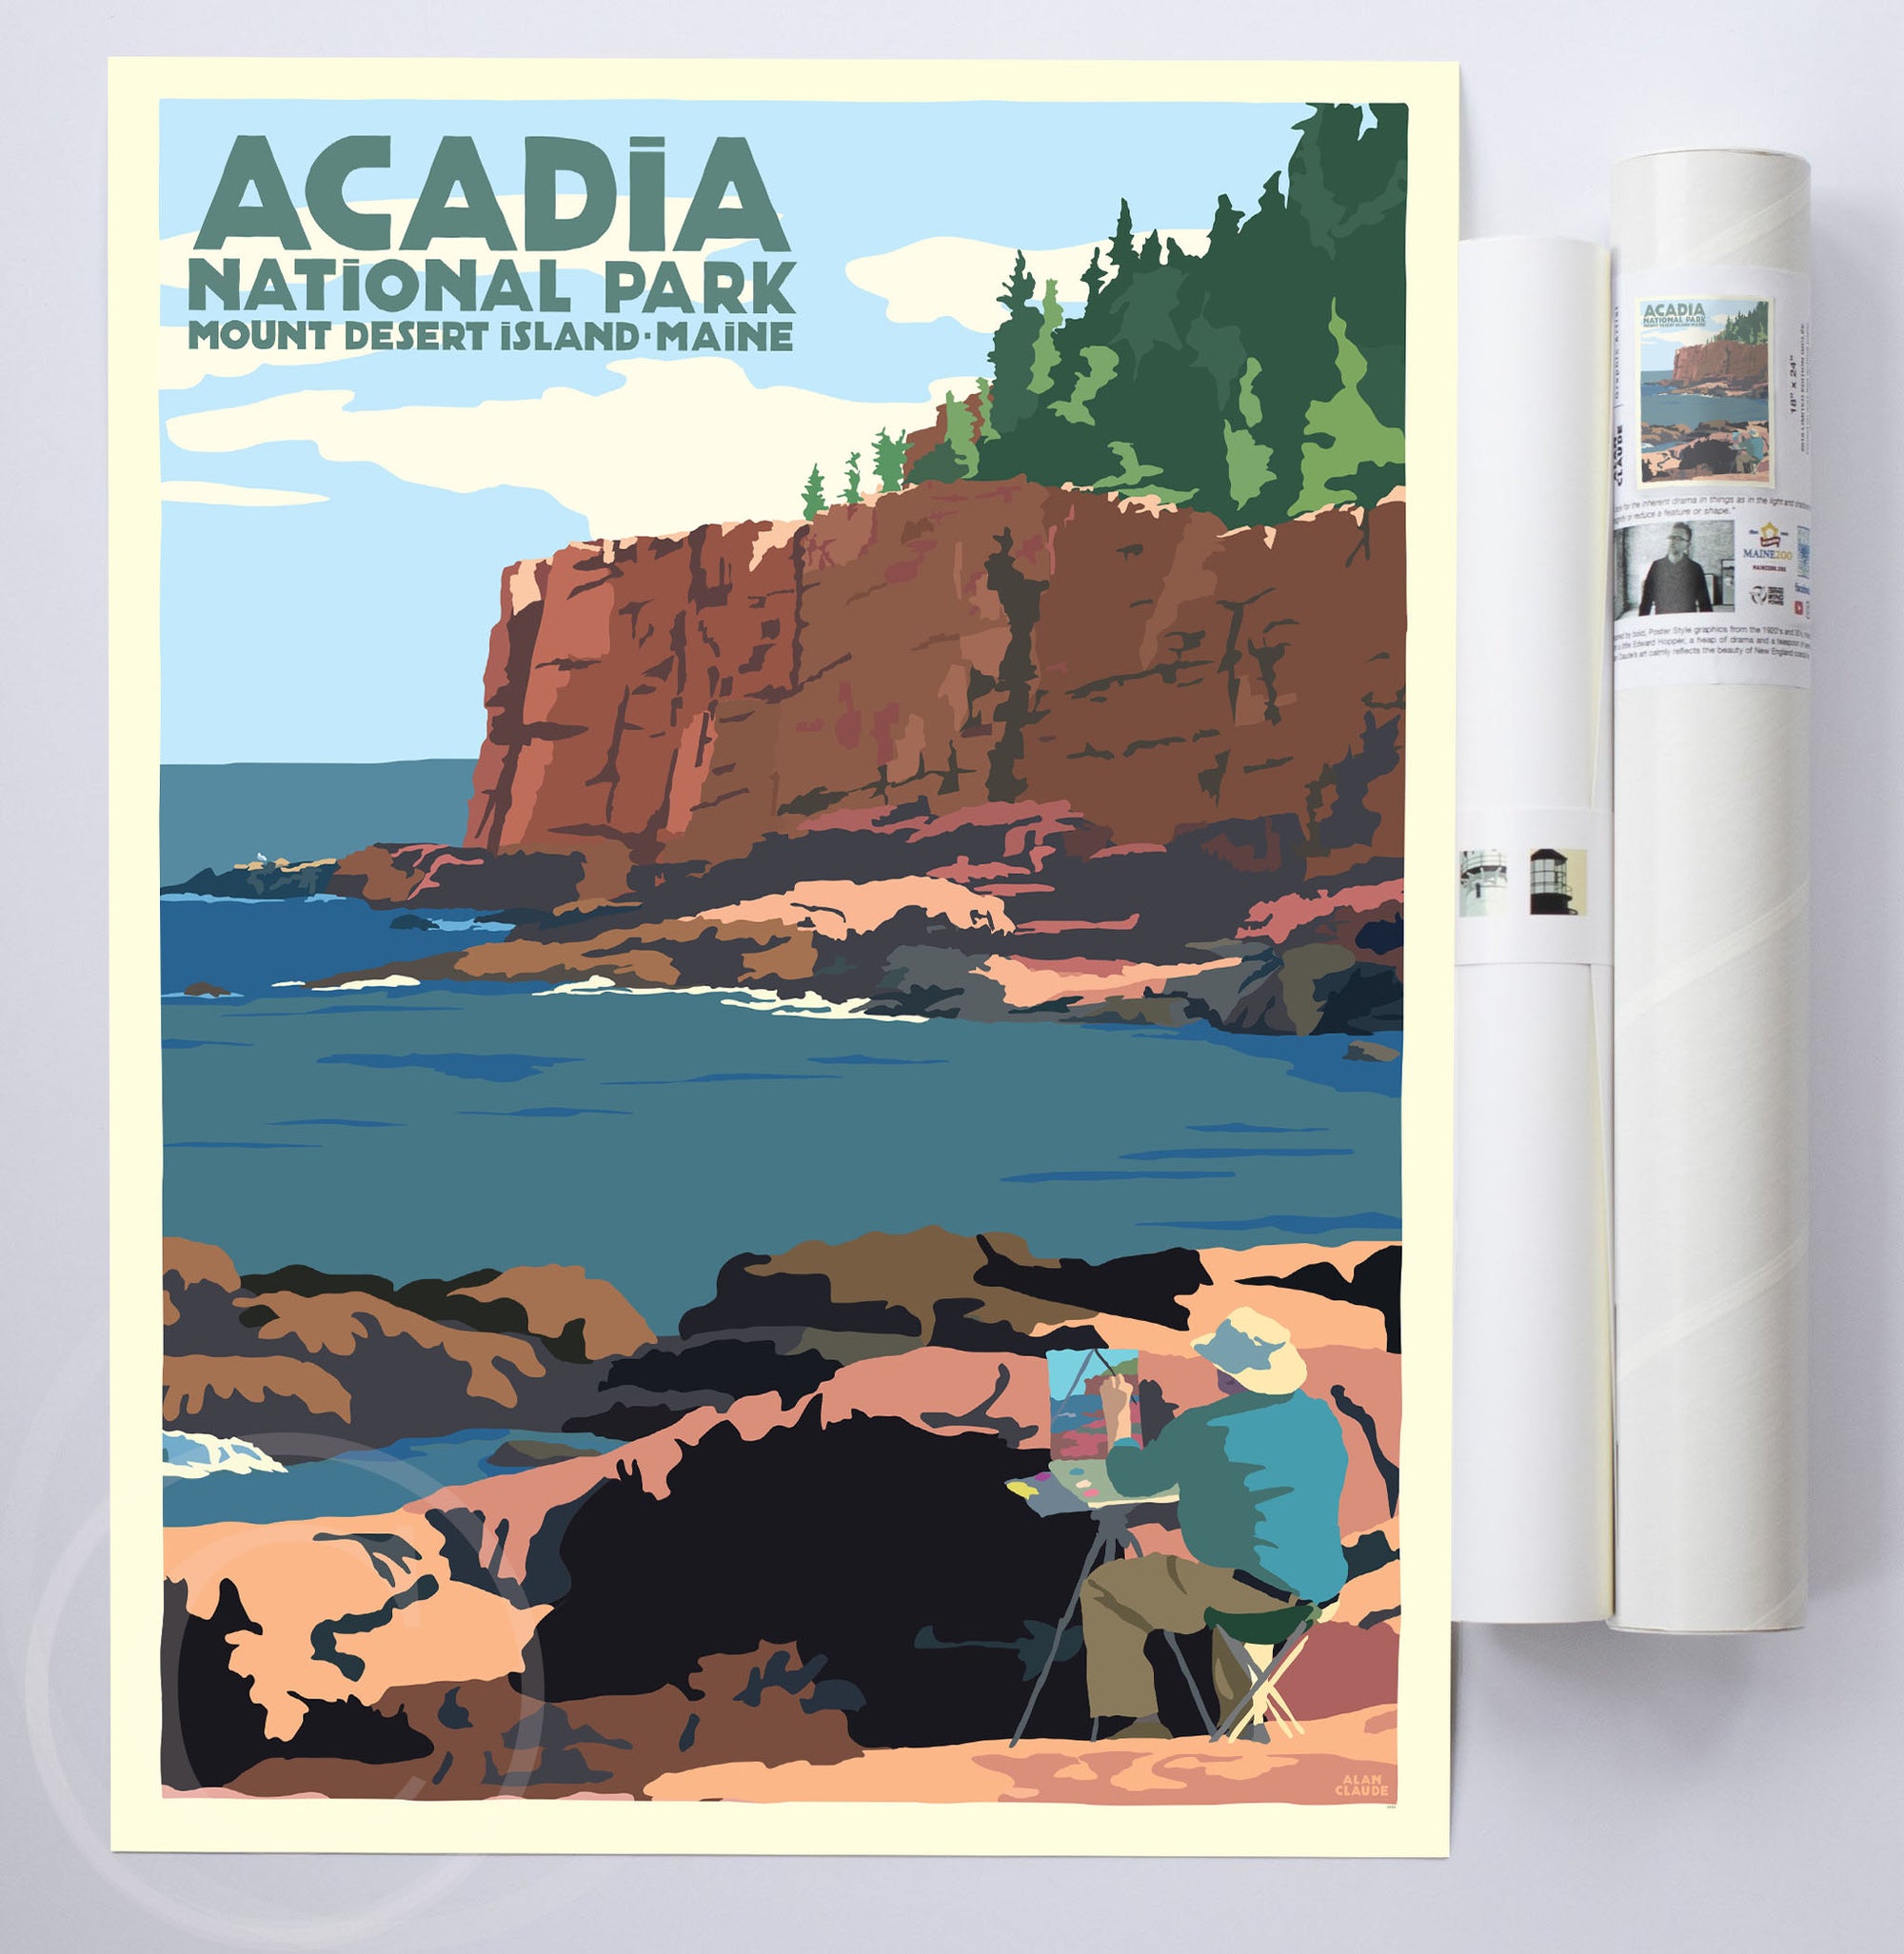 Painting In Acadia National Park Art Print 18" x 24" Wall Poster By Alan Claude - Maine